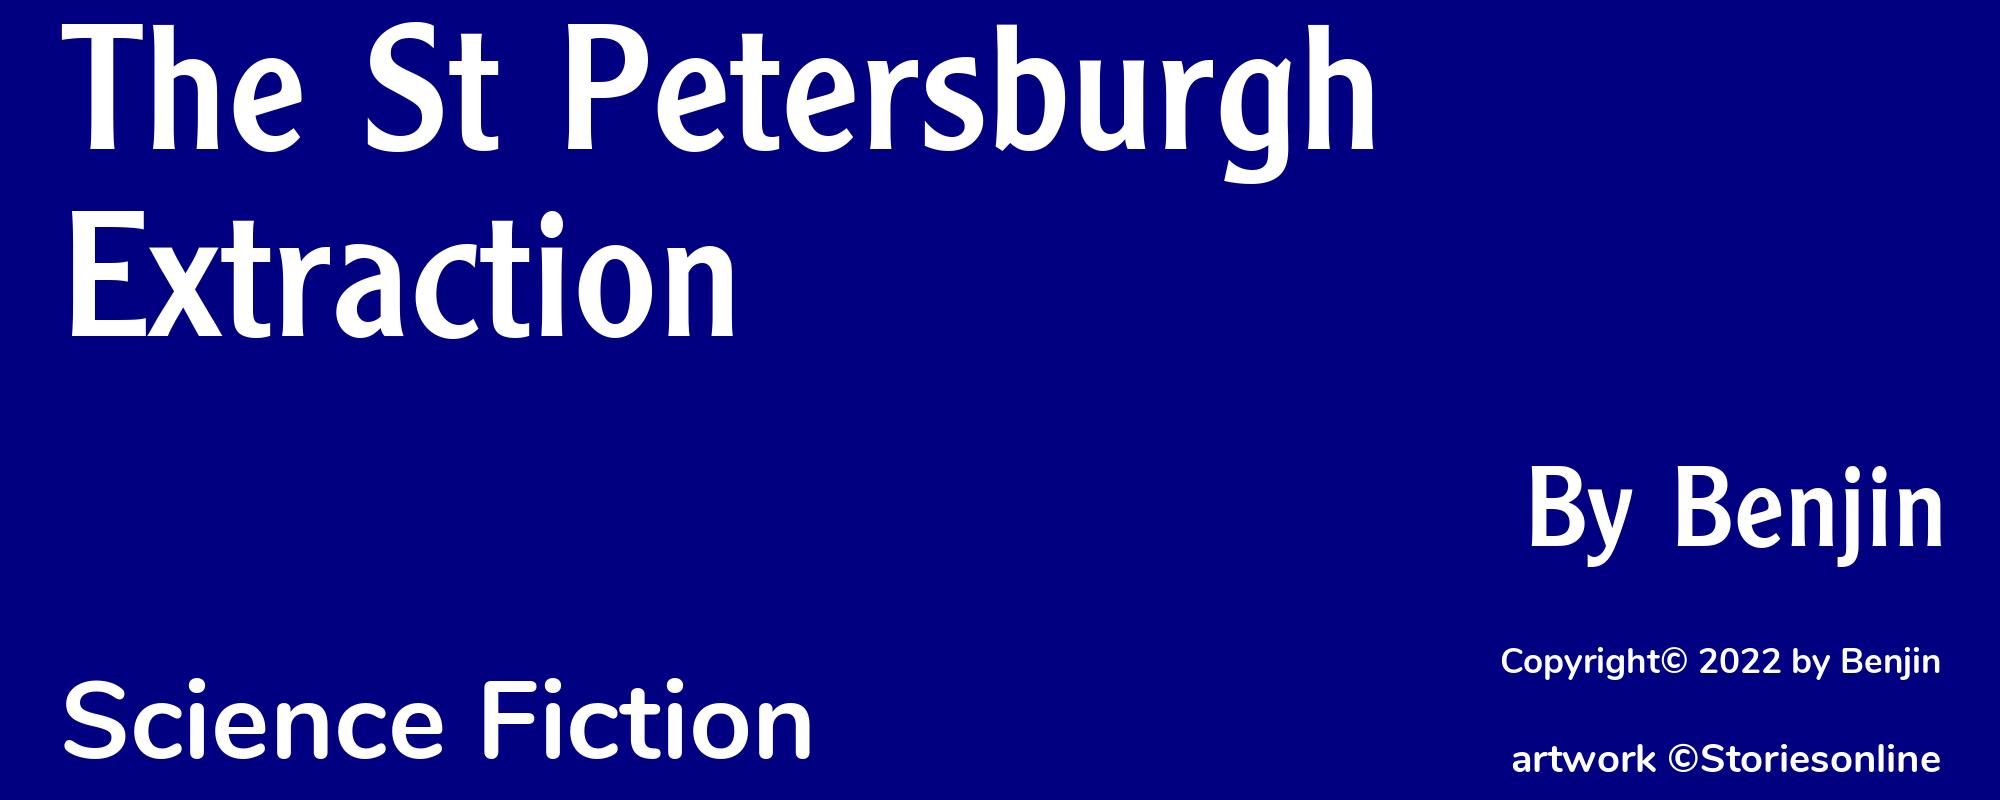 The St Petersburgh Extraction - Cover